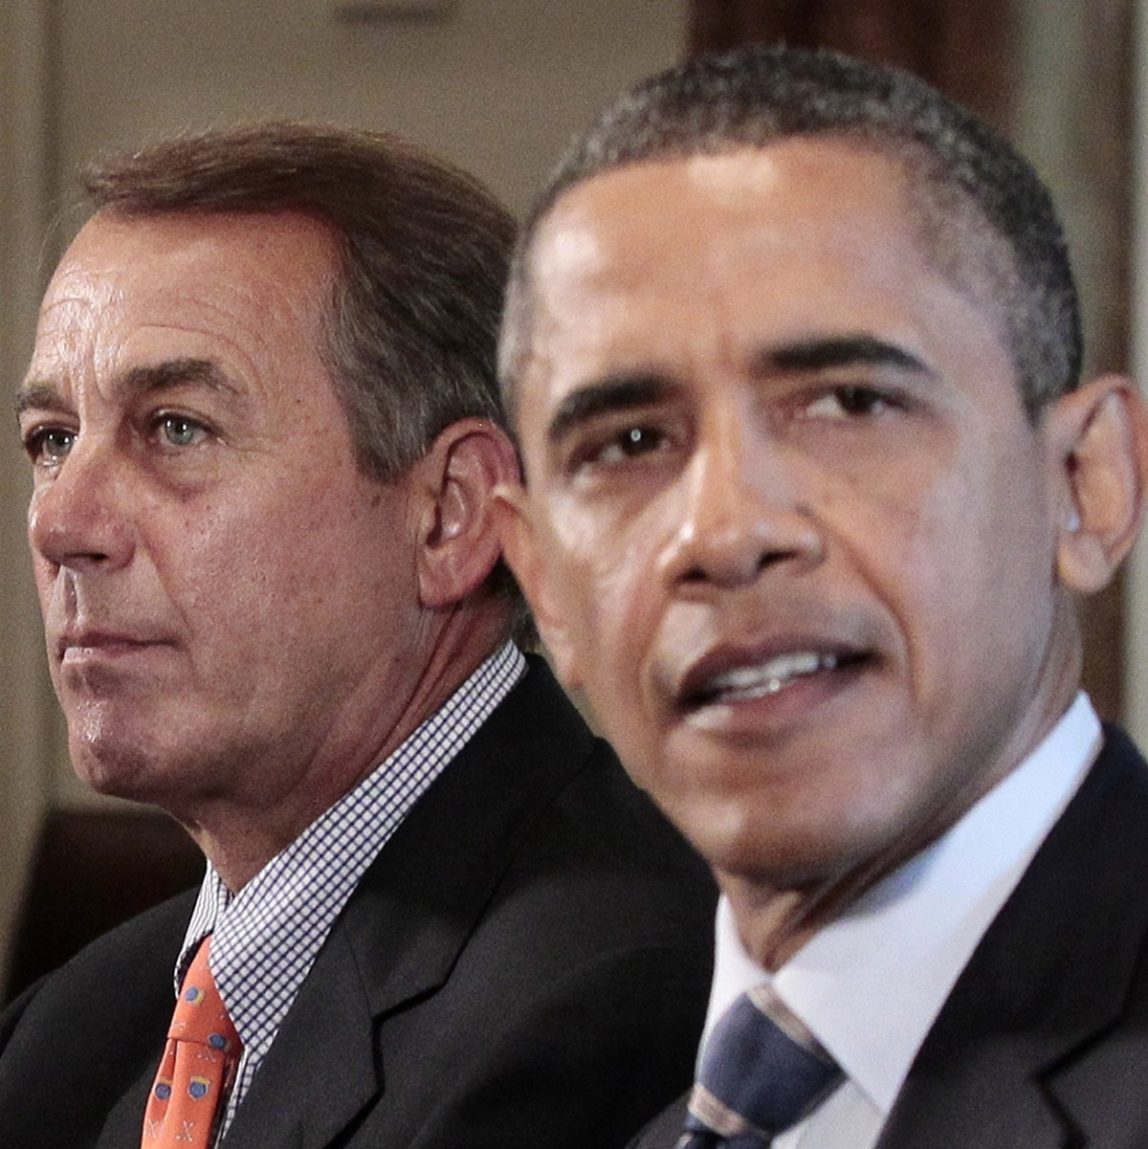 In this July 7, 2011 file photo, House Speaker John Boehner, of Ohio, listens at left as President Barack Obama speaks during a meeting with Congressional leadership to discuss the debt in the Cabinet Room of the White House in Washington. (AP Photo/Pablo Martinez Monsivais, File)